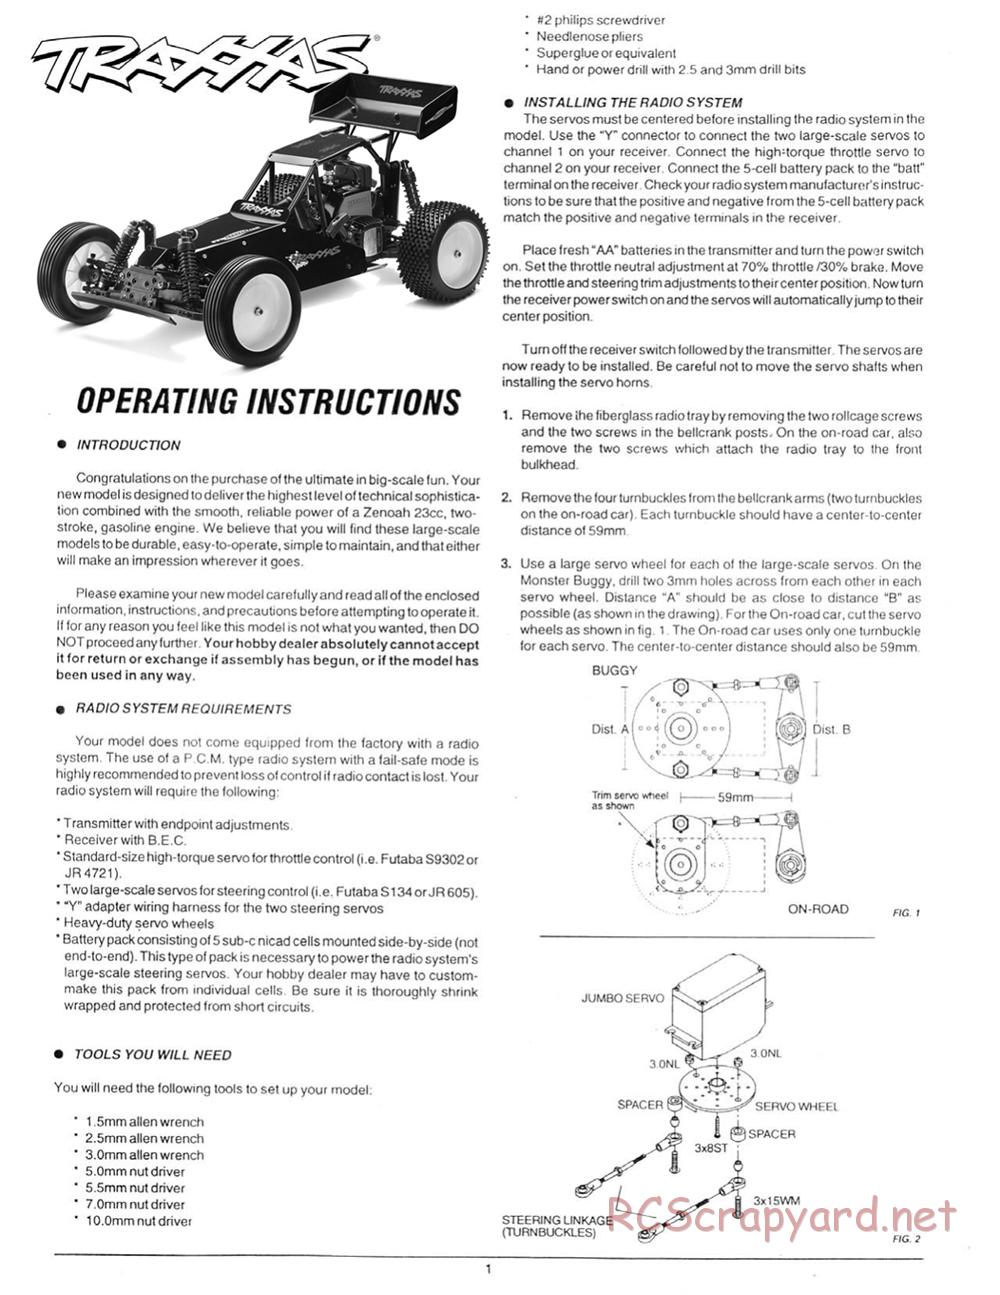 Traxxas - Monster Buggy (Gas Buggy) (1993) - Manual - Page 1